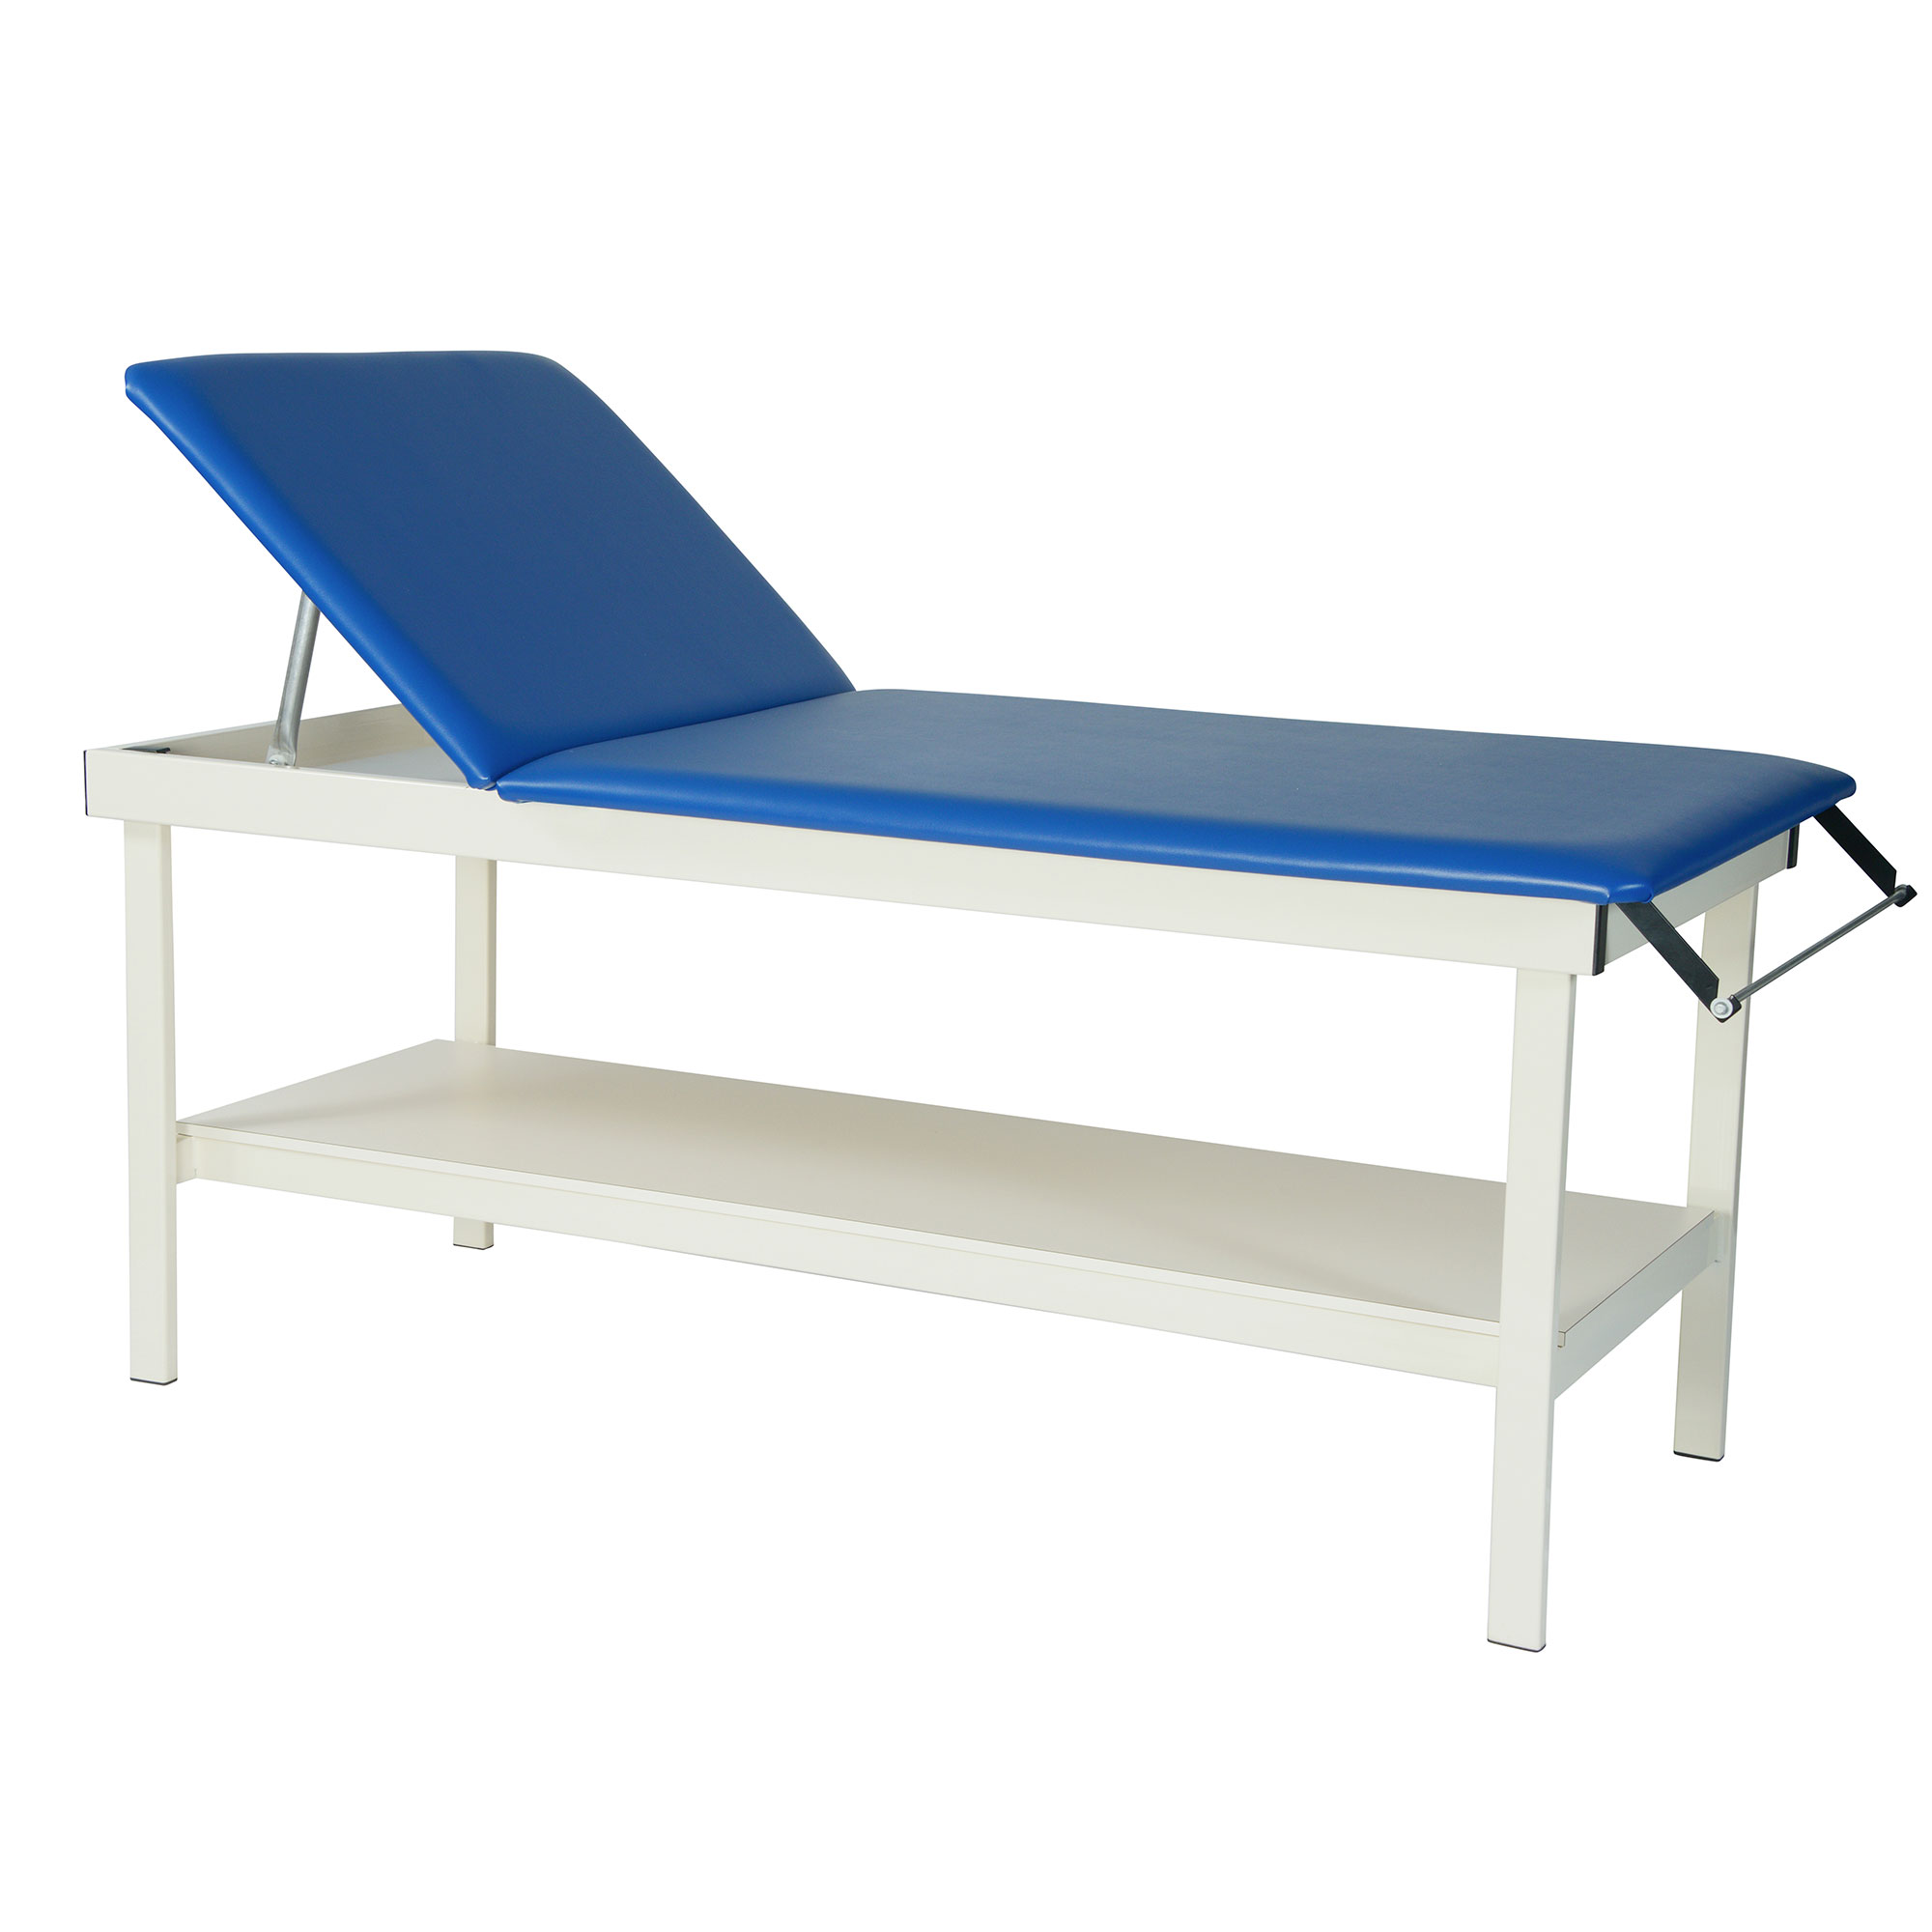 X-Wide Exam Table with Steel Frame 